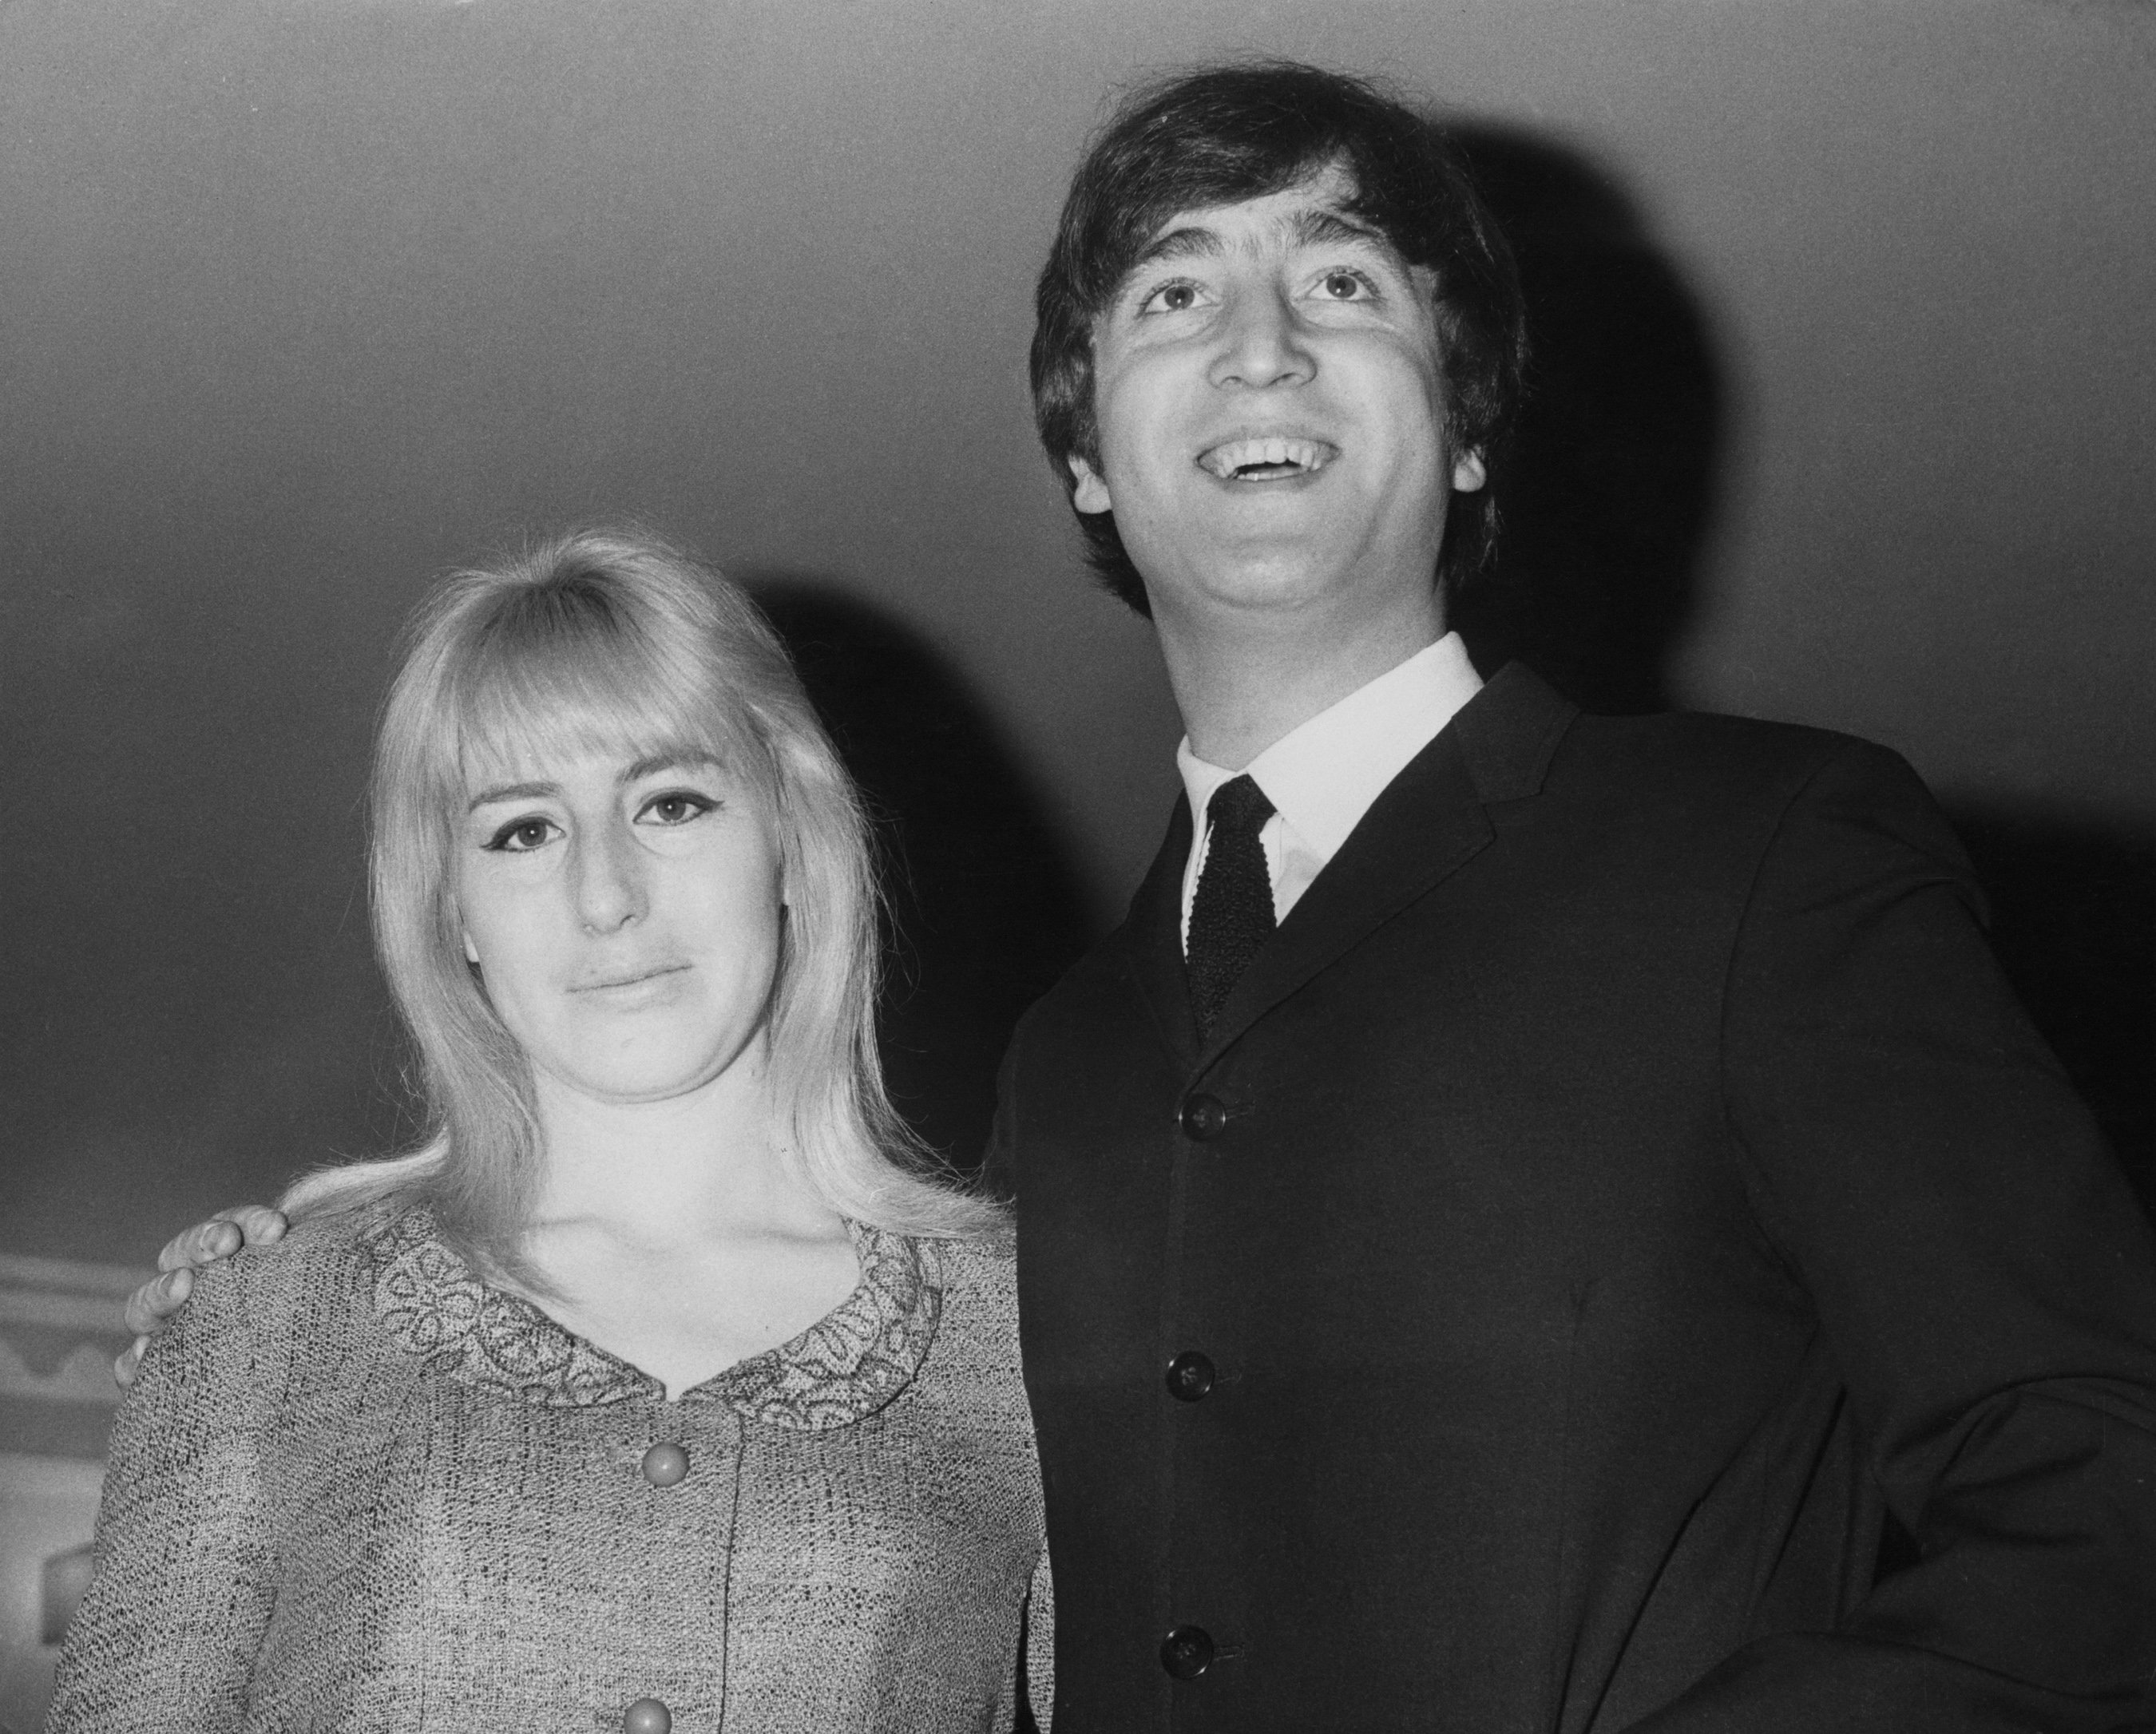 Musician, singer and songwriter John Lennon (1940 - 1980) of British rock group the Beatles with his first wife Cynthia during the launch of his book 'In His Own Write'